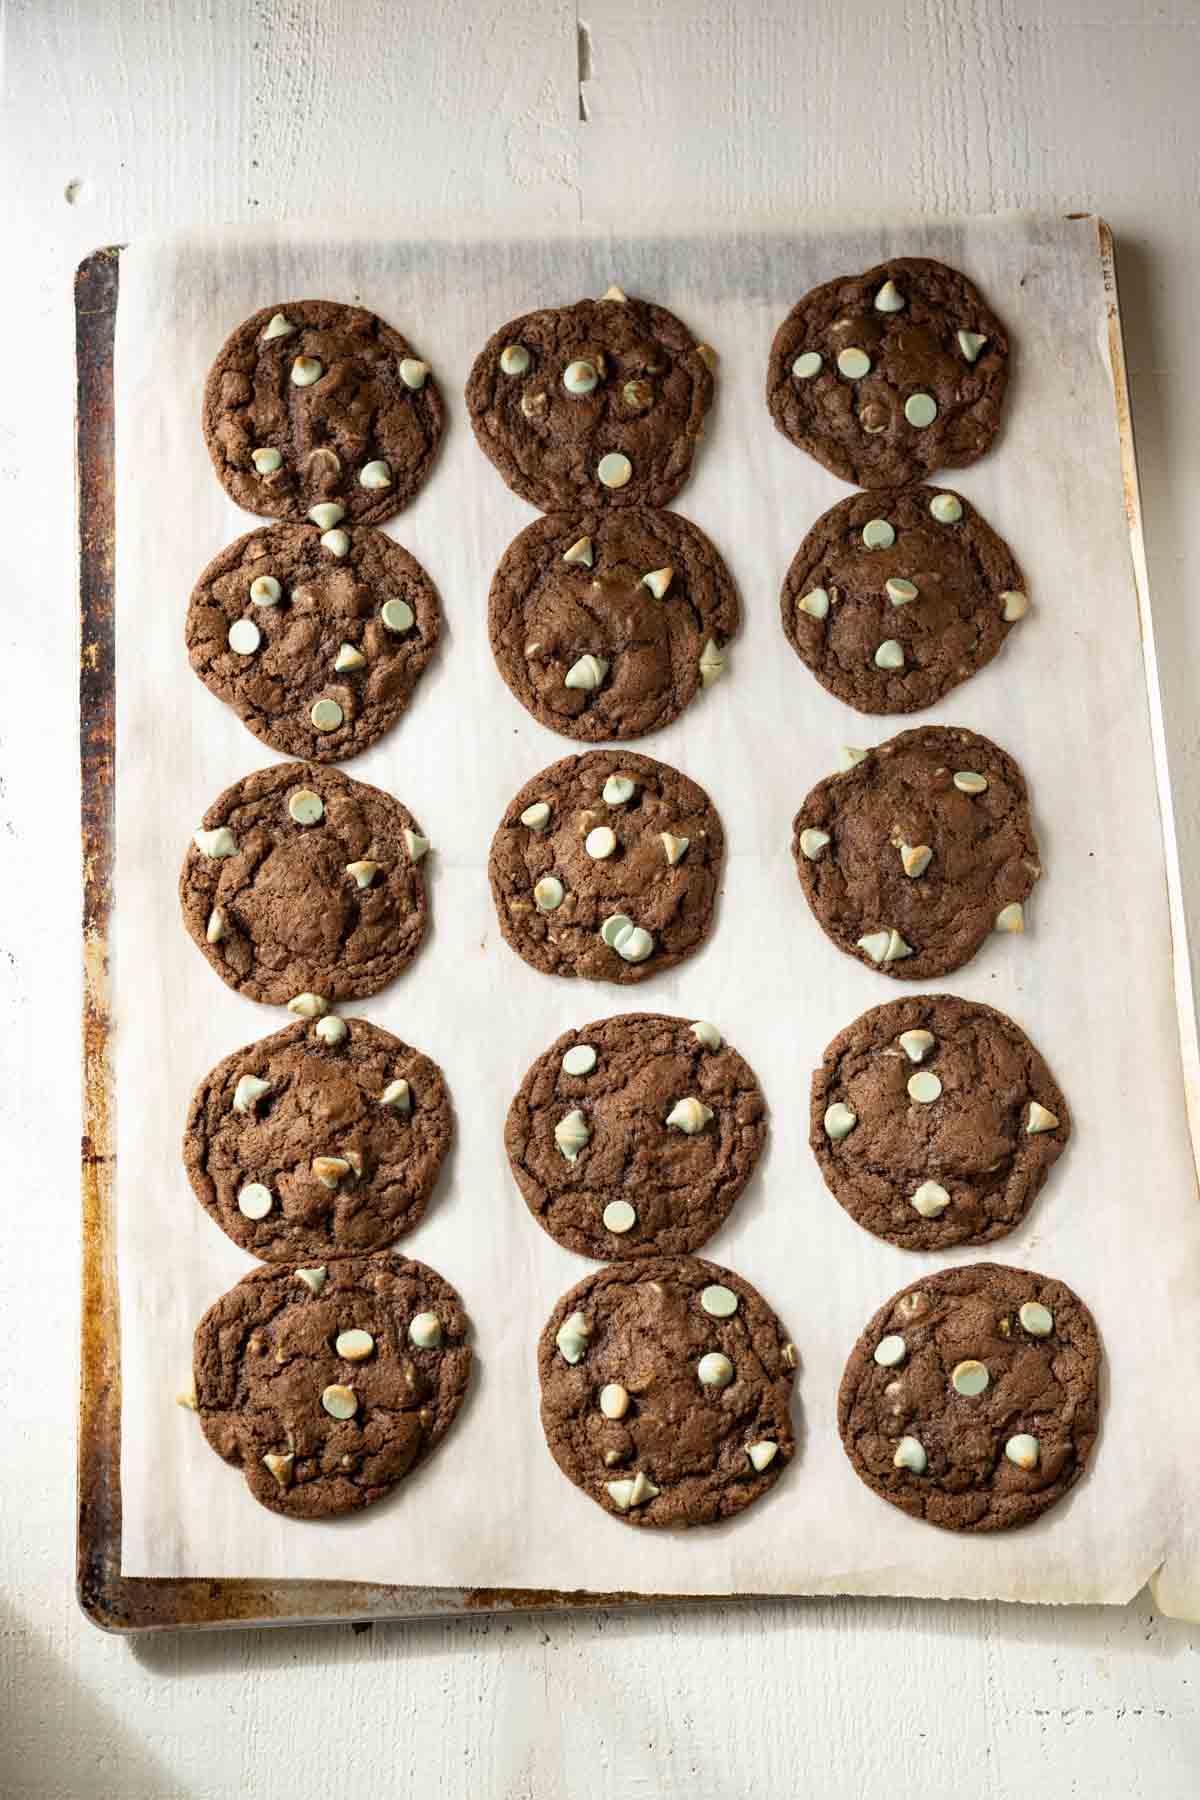 Baked chocolate cookies with green mint chips on a parchment paper lined baking sheet.